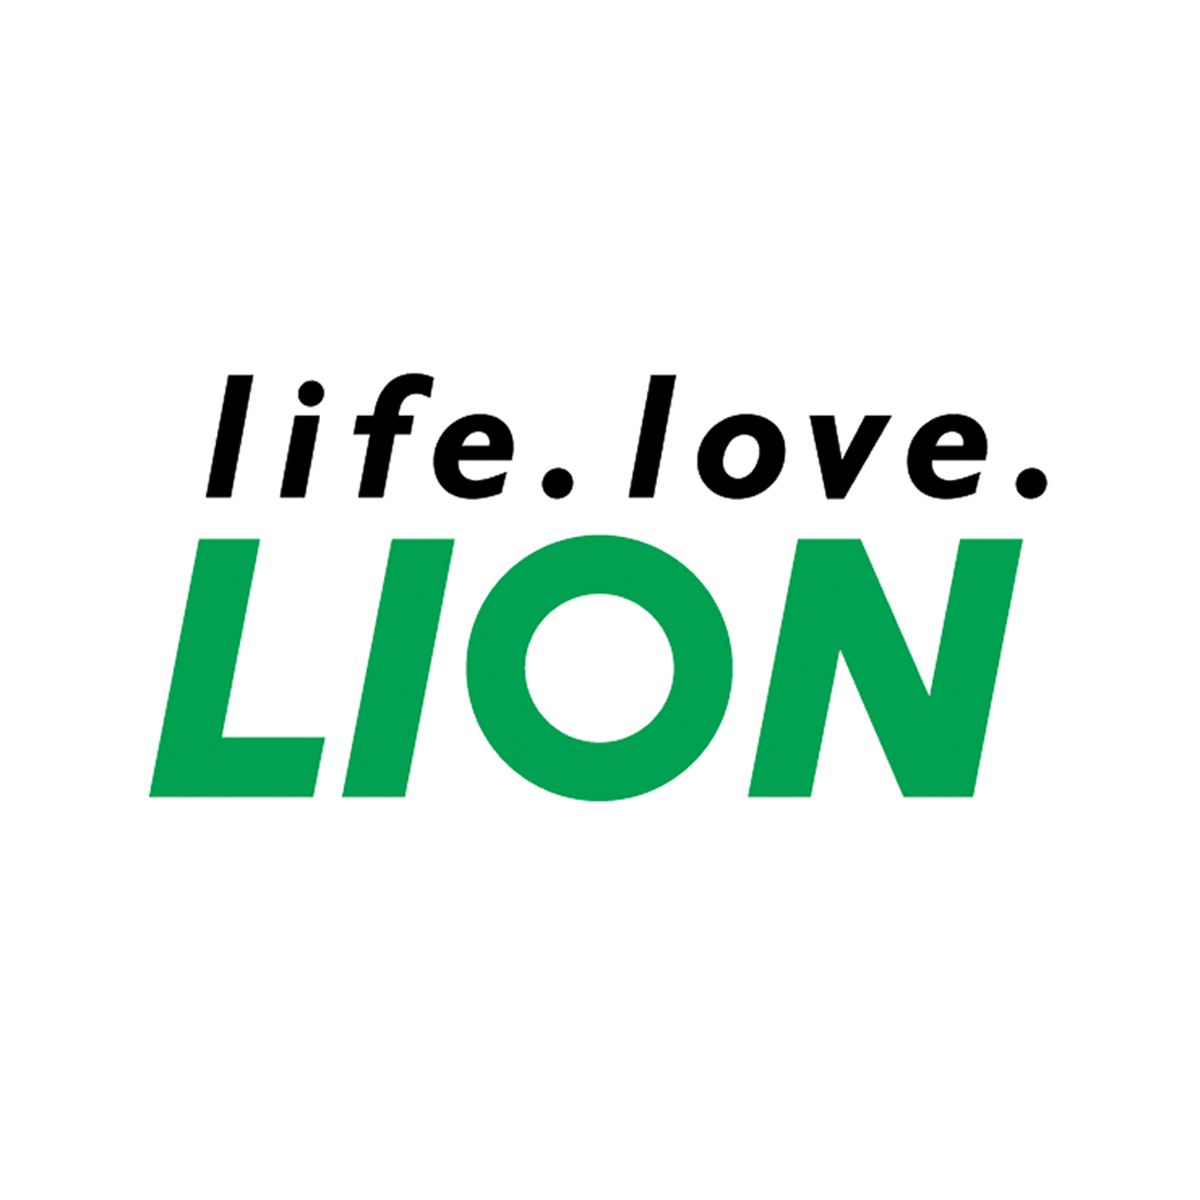 About us, History and Company profile of Lion Office Products Corp.